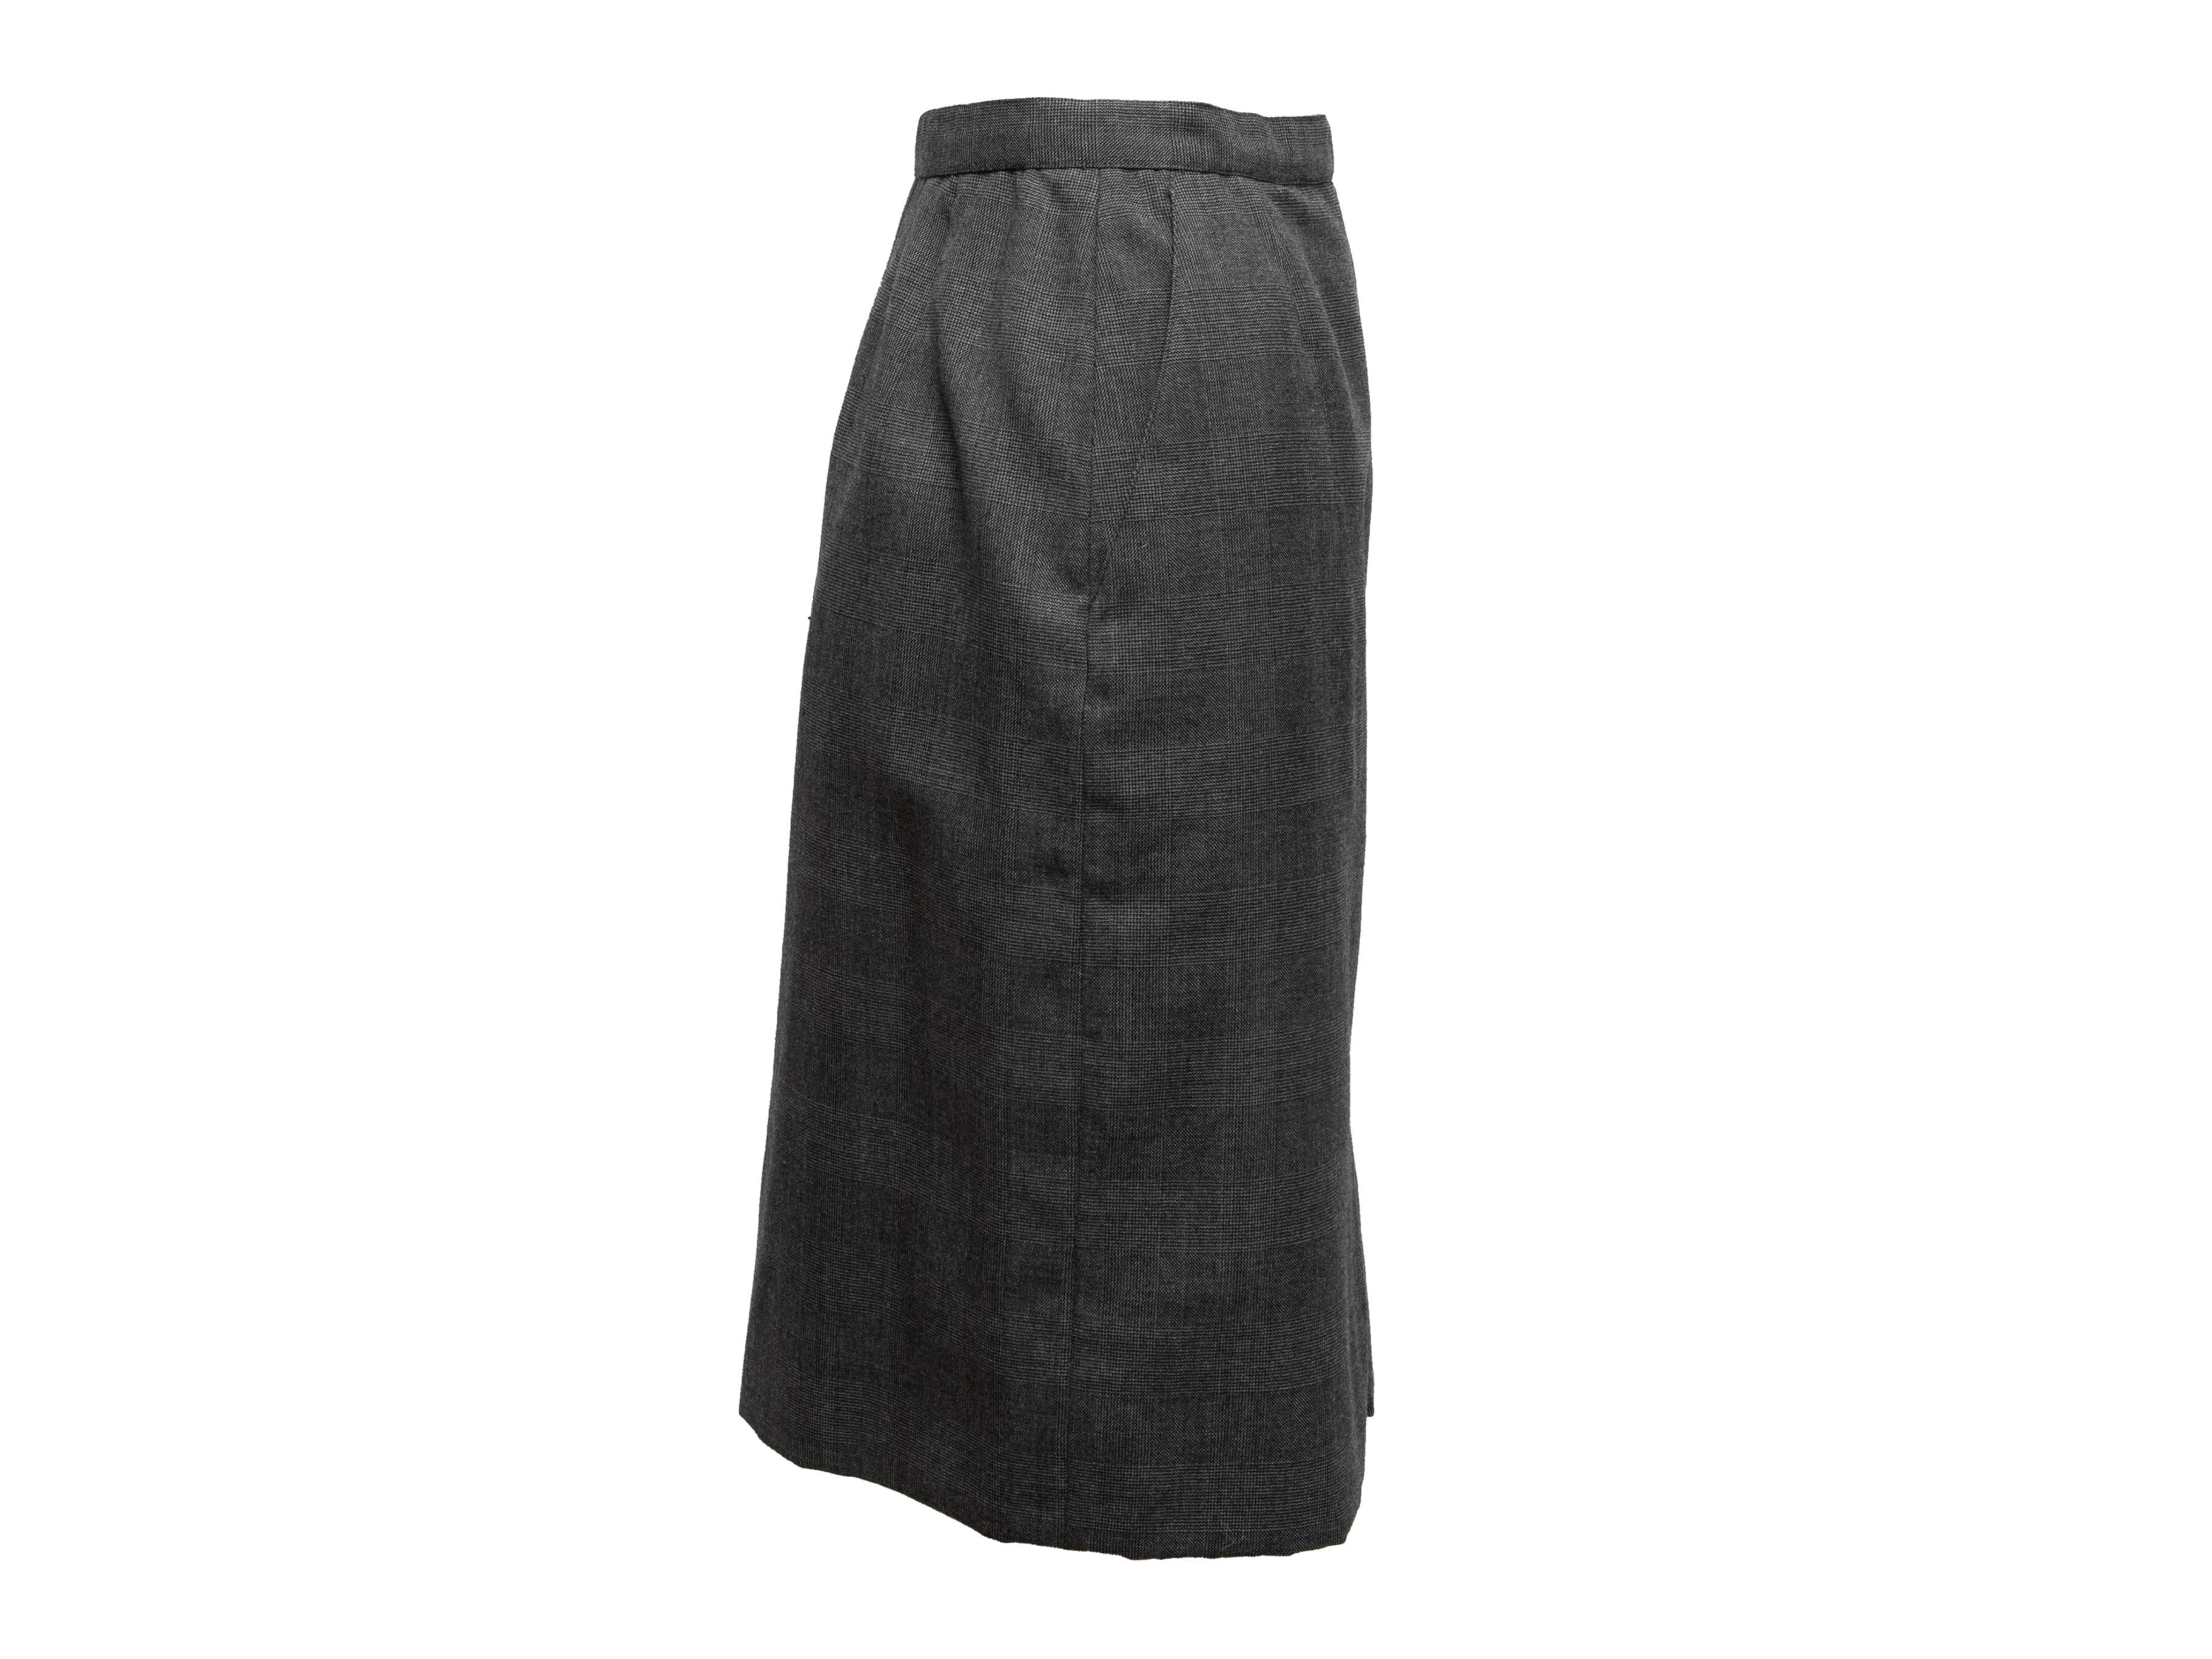 Vintage grey wool pencil skirt by Chanel. Circa 1970s. Hip pockets. Side zip closure. 26